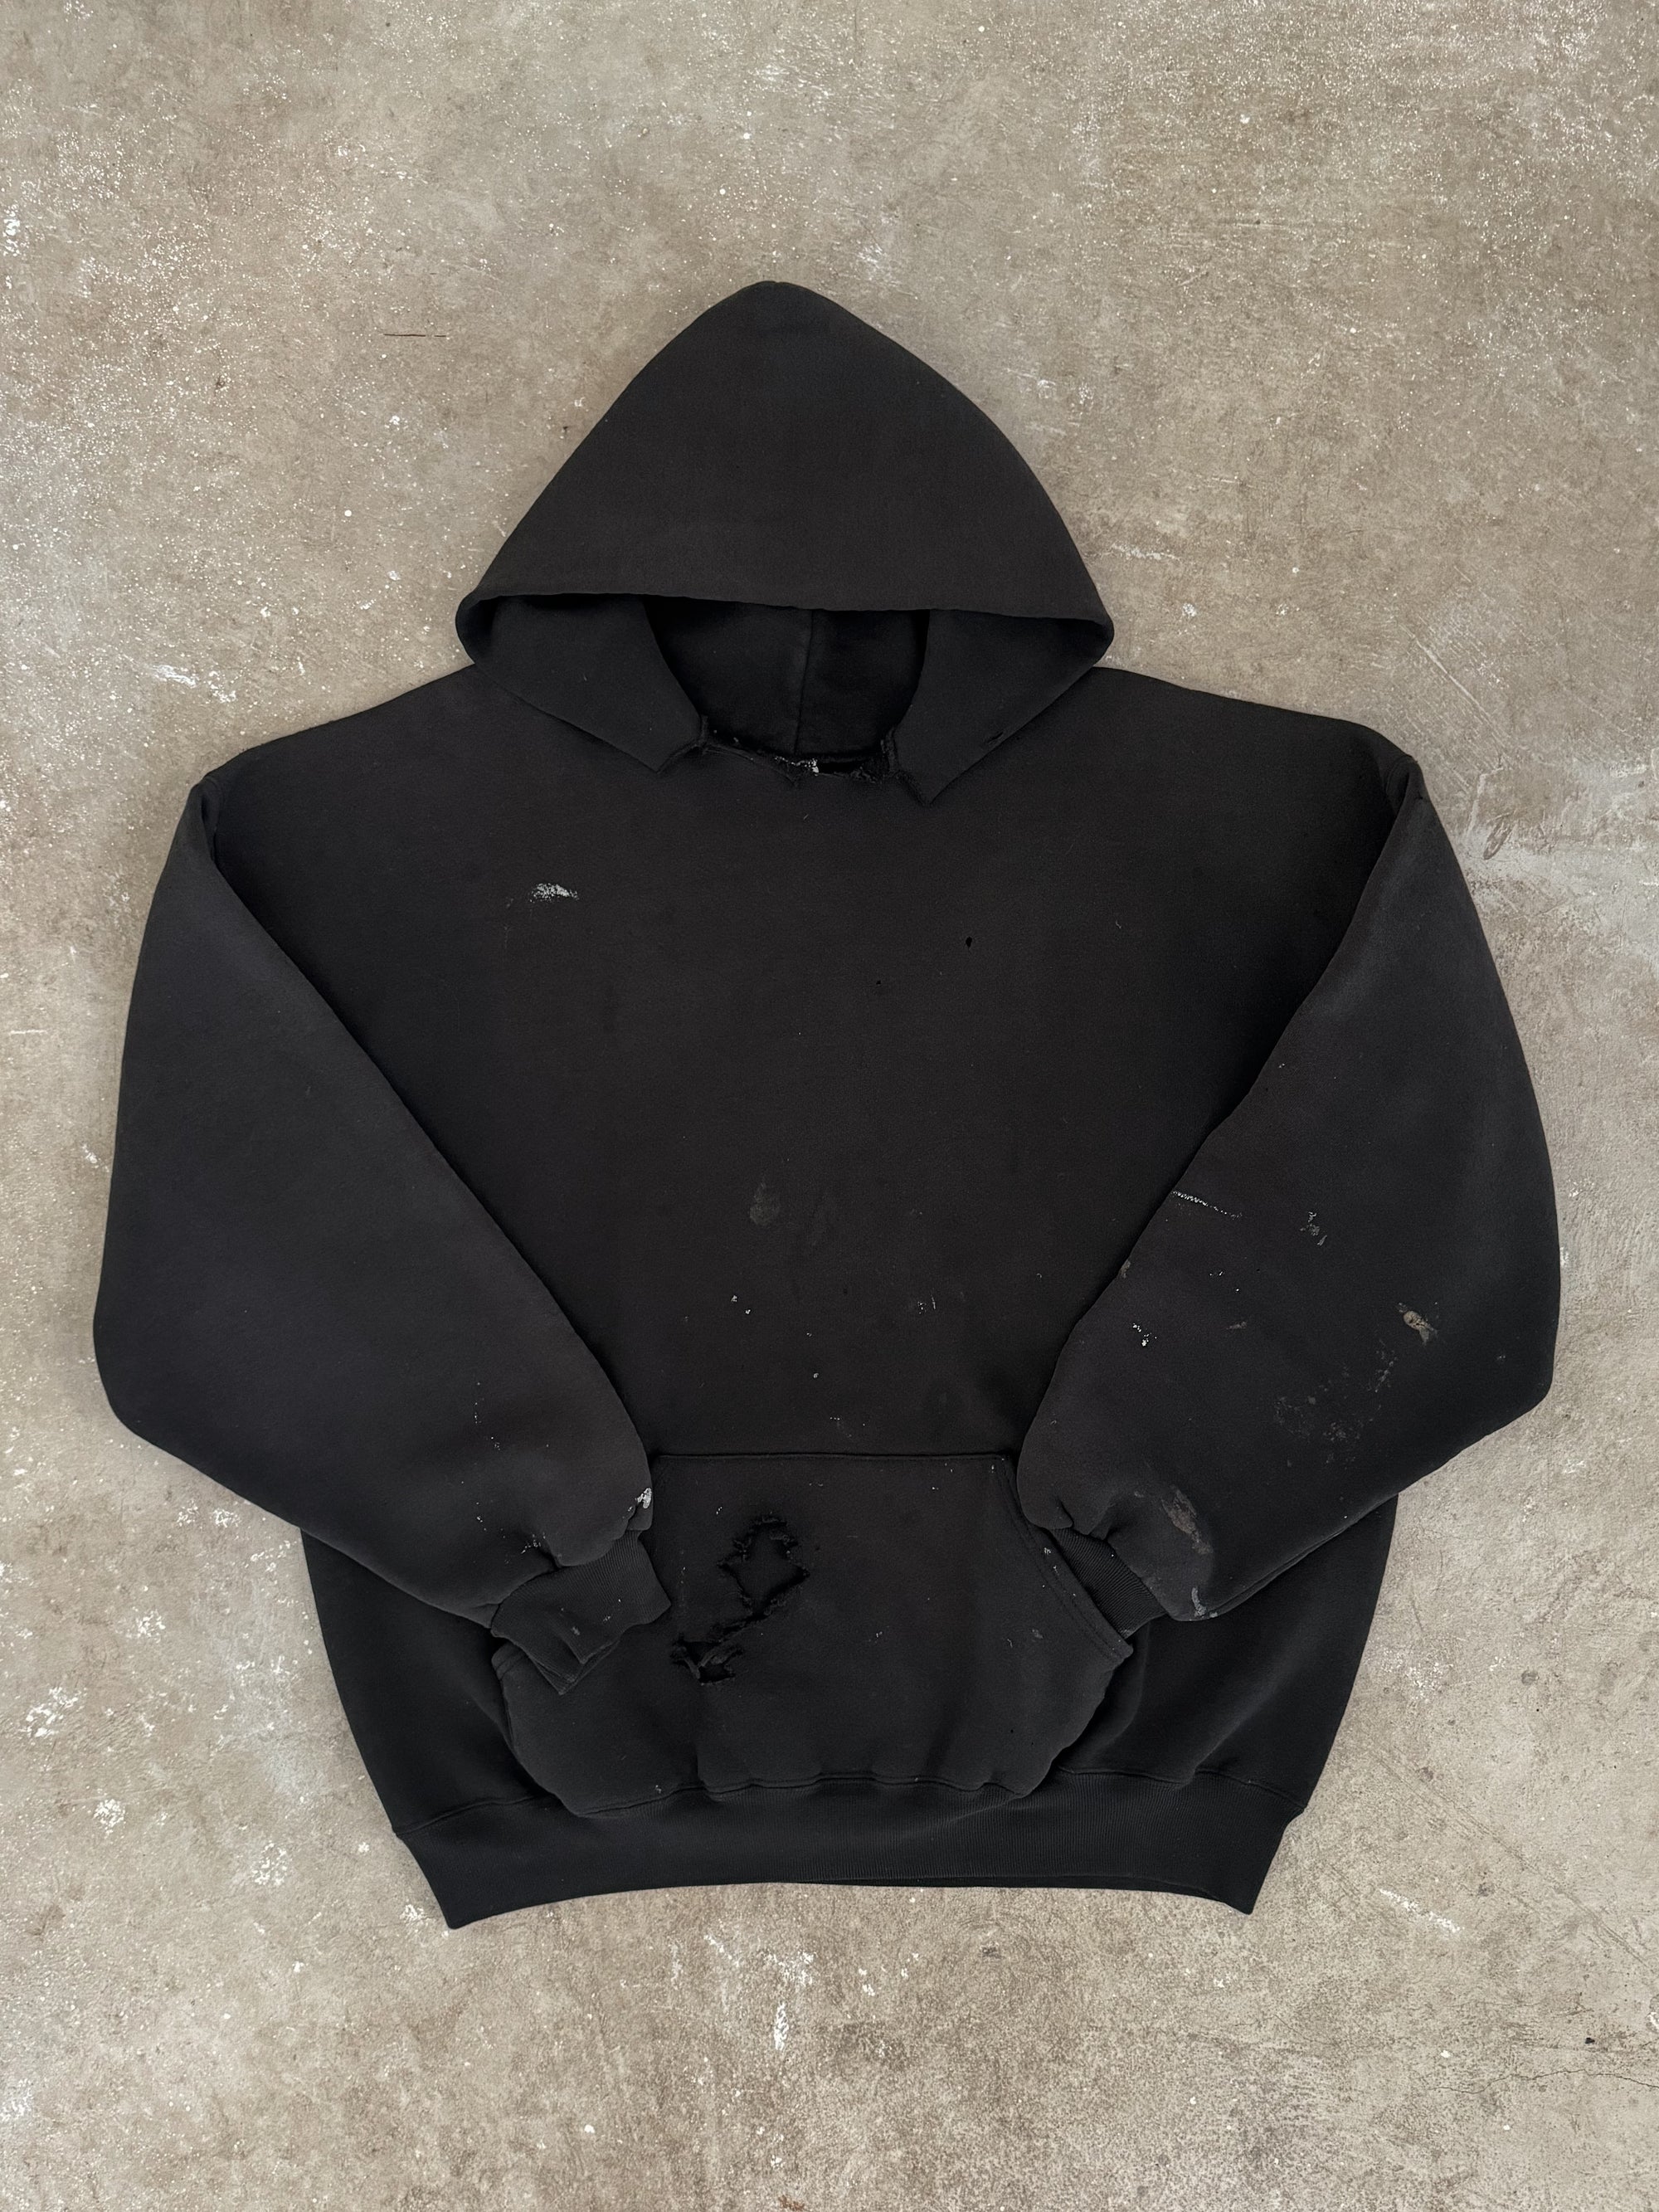 Early 00s Russell Distressed Painted Black Hoodie (XL)